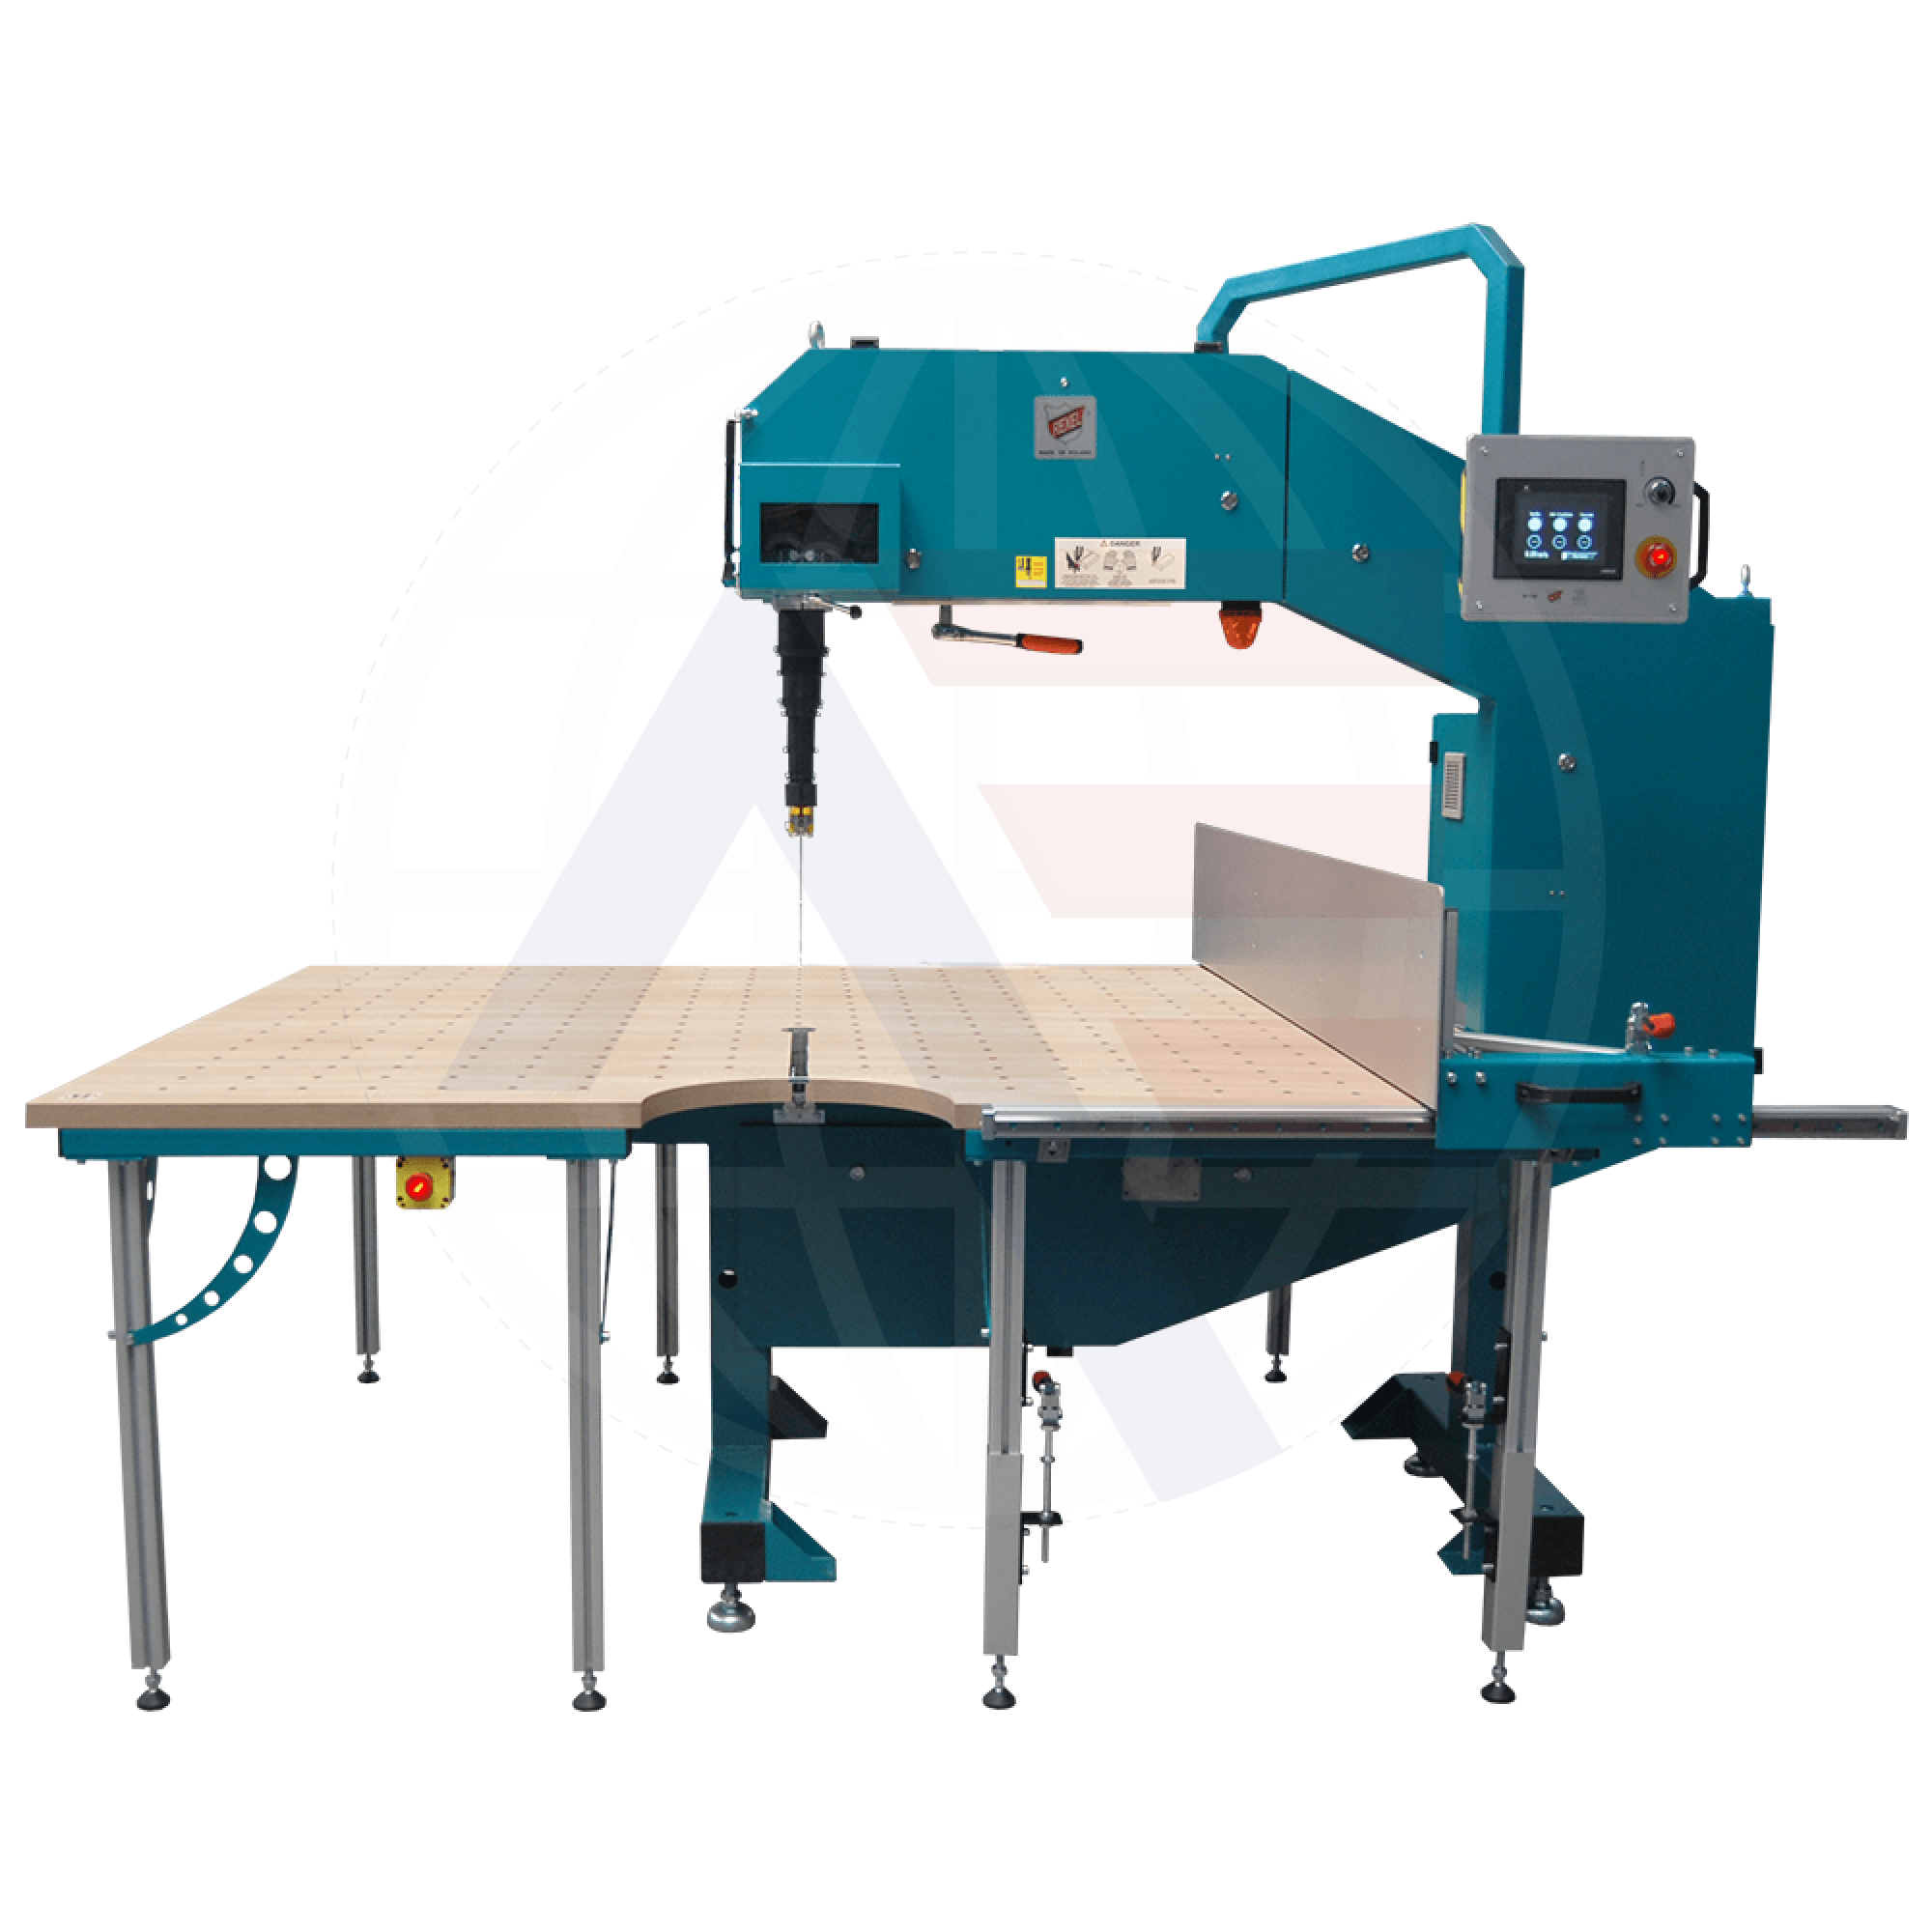 Rexel R1150 Band Knife Cutting Machine For Upholstery Foam Machines